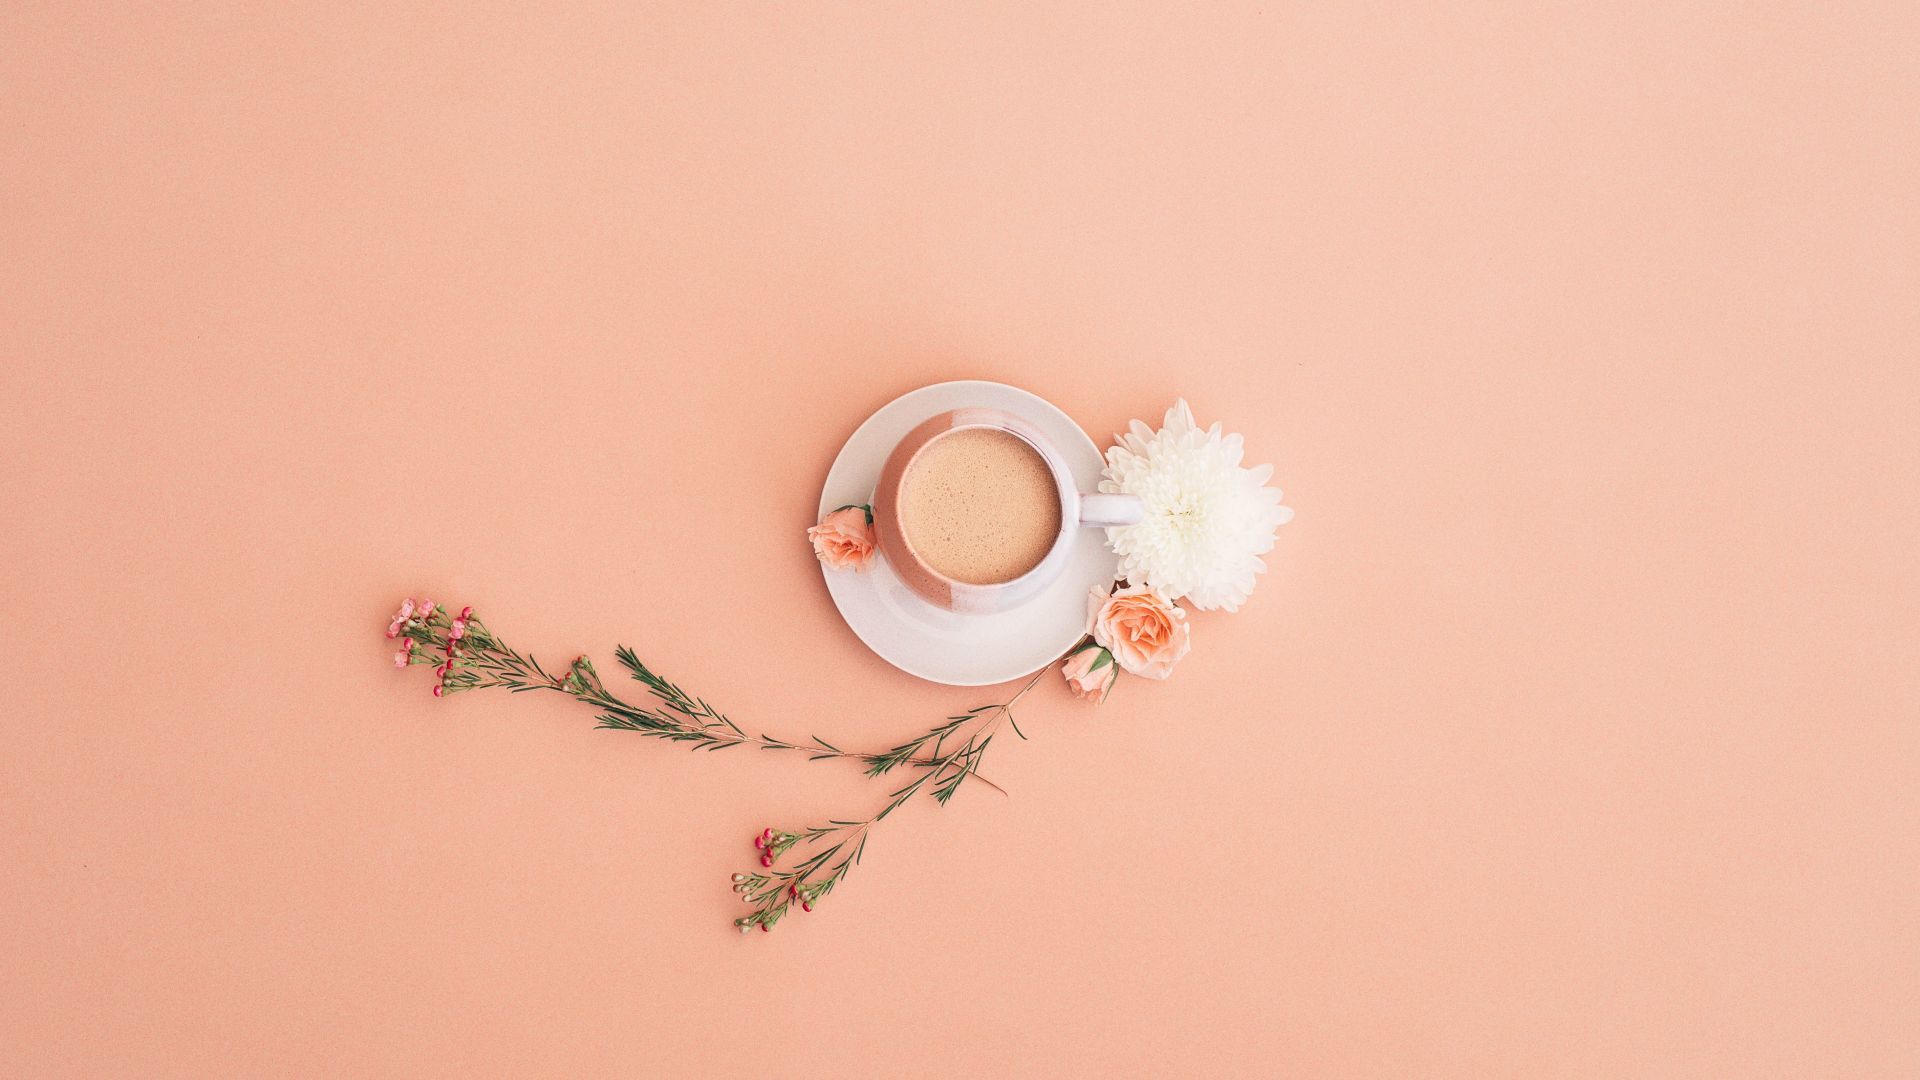 Desktop wallpaper minimal, cup, flowers, HD image, picture, background, 9a0558